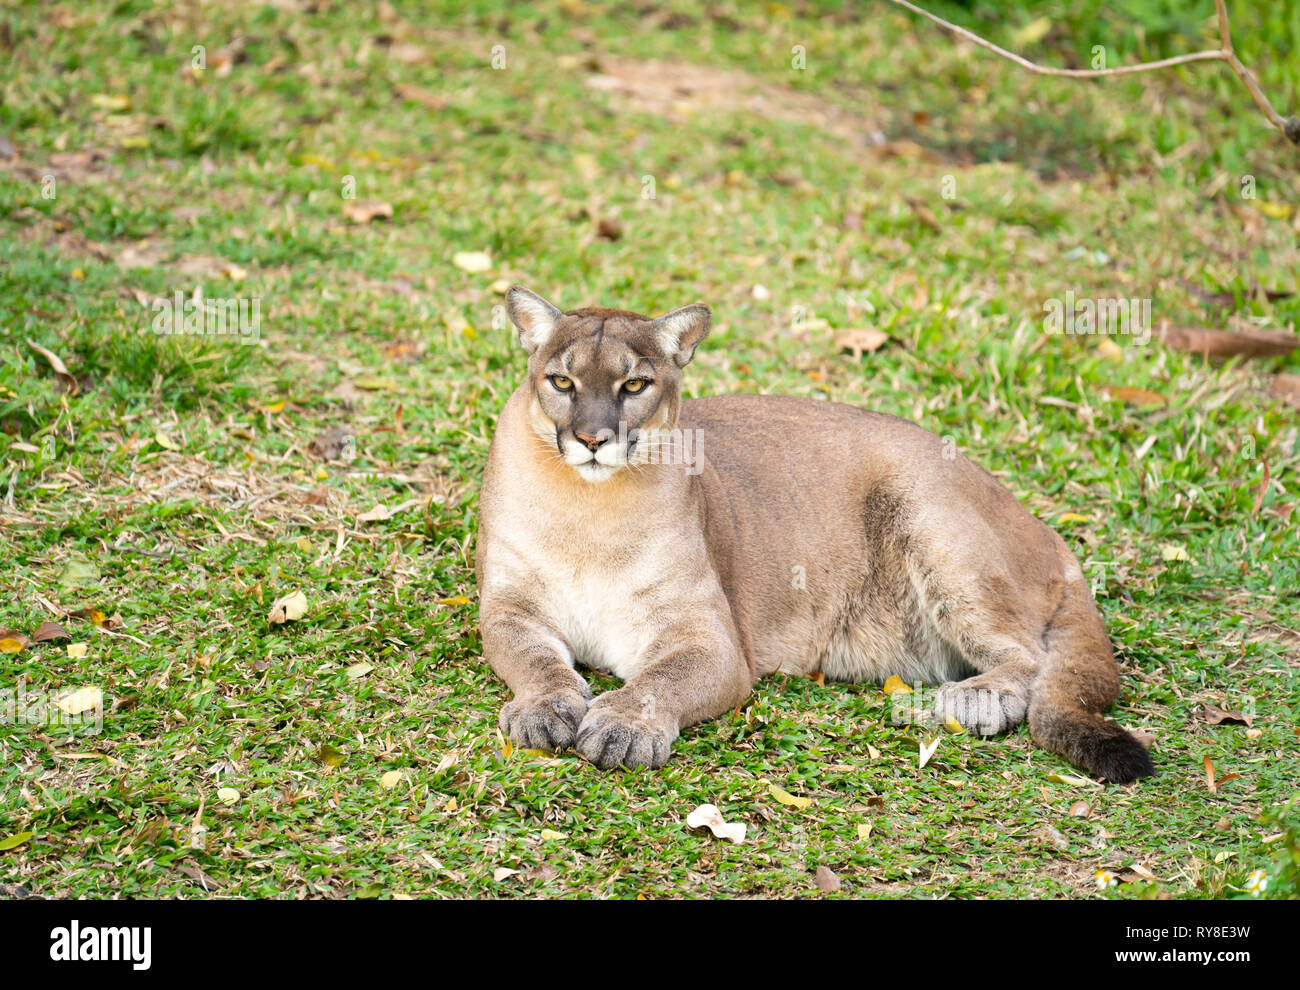 puma or cougar resting on green grass Stock Photo - Alamy